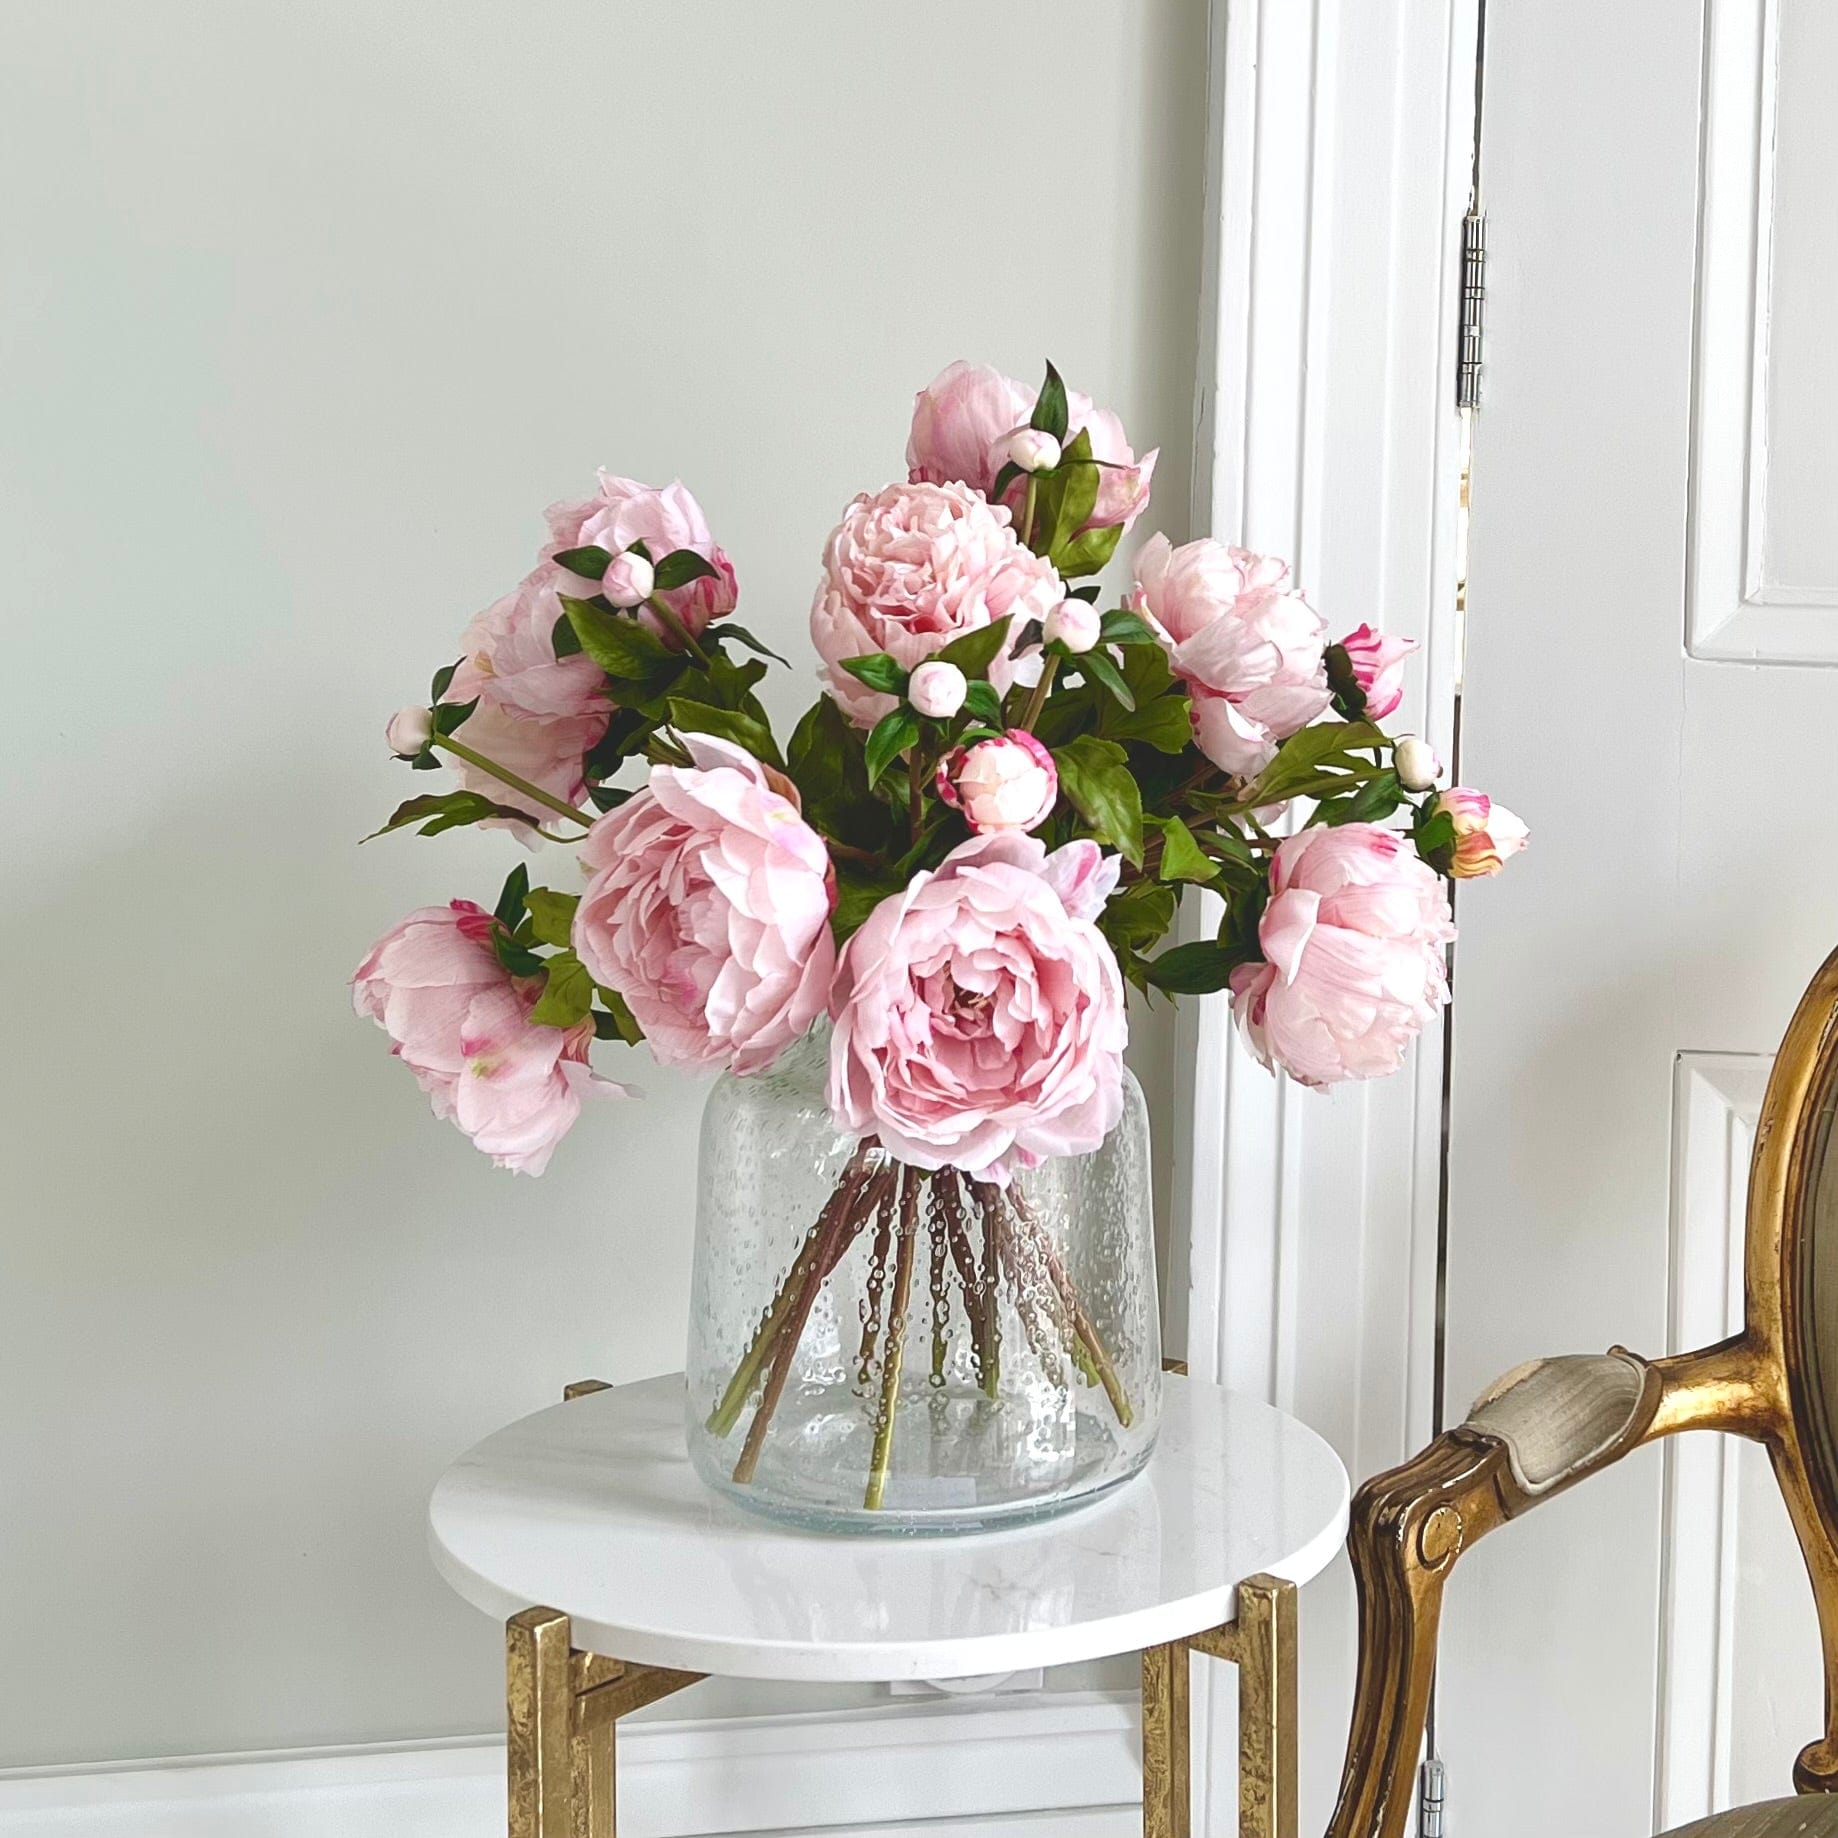 Artificial flowers luxury faux silk Pale Pink Classic & Open Peony lifelike realistic faux flowers buy online from The Faux Flower Company UK ABY6043LPK ABY4196LPK